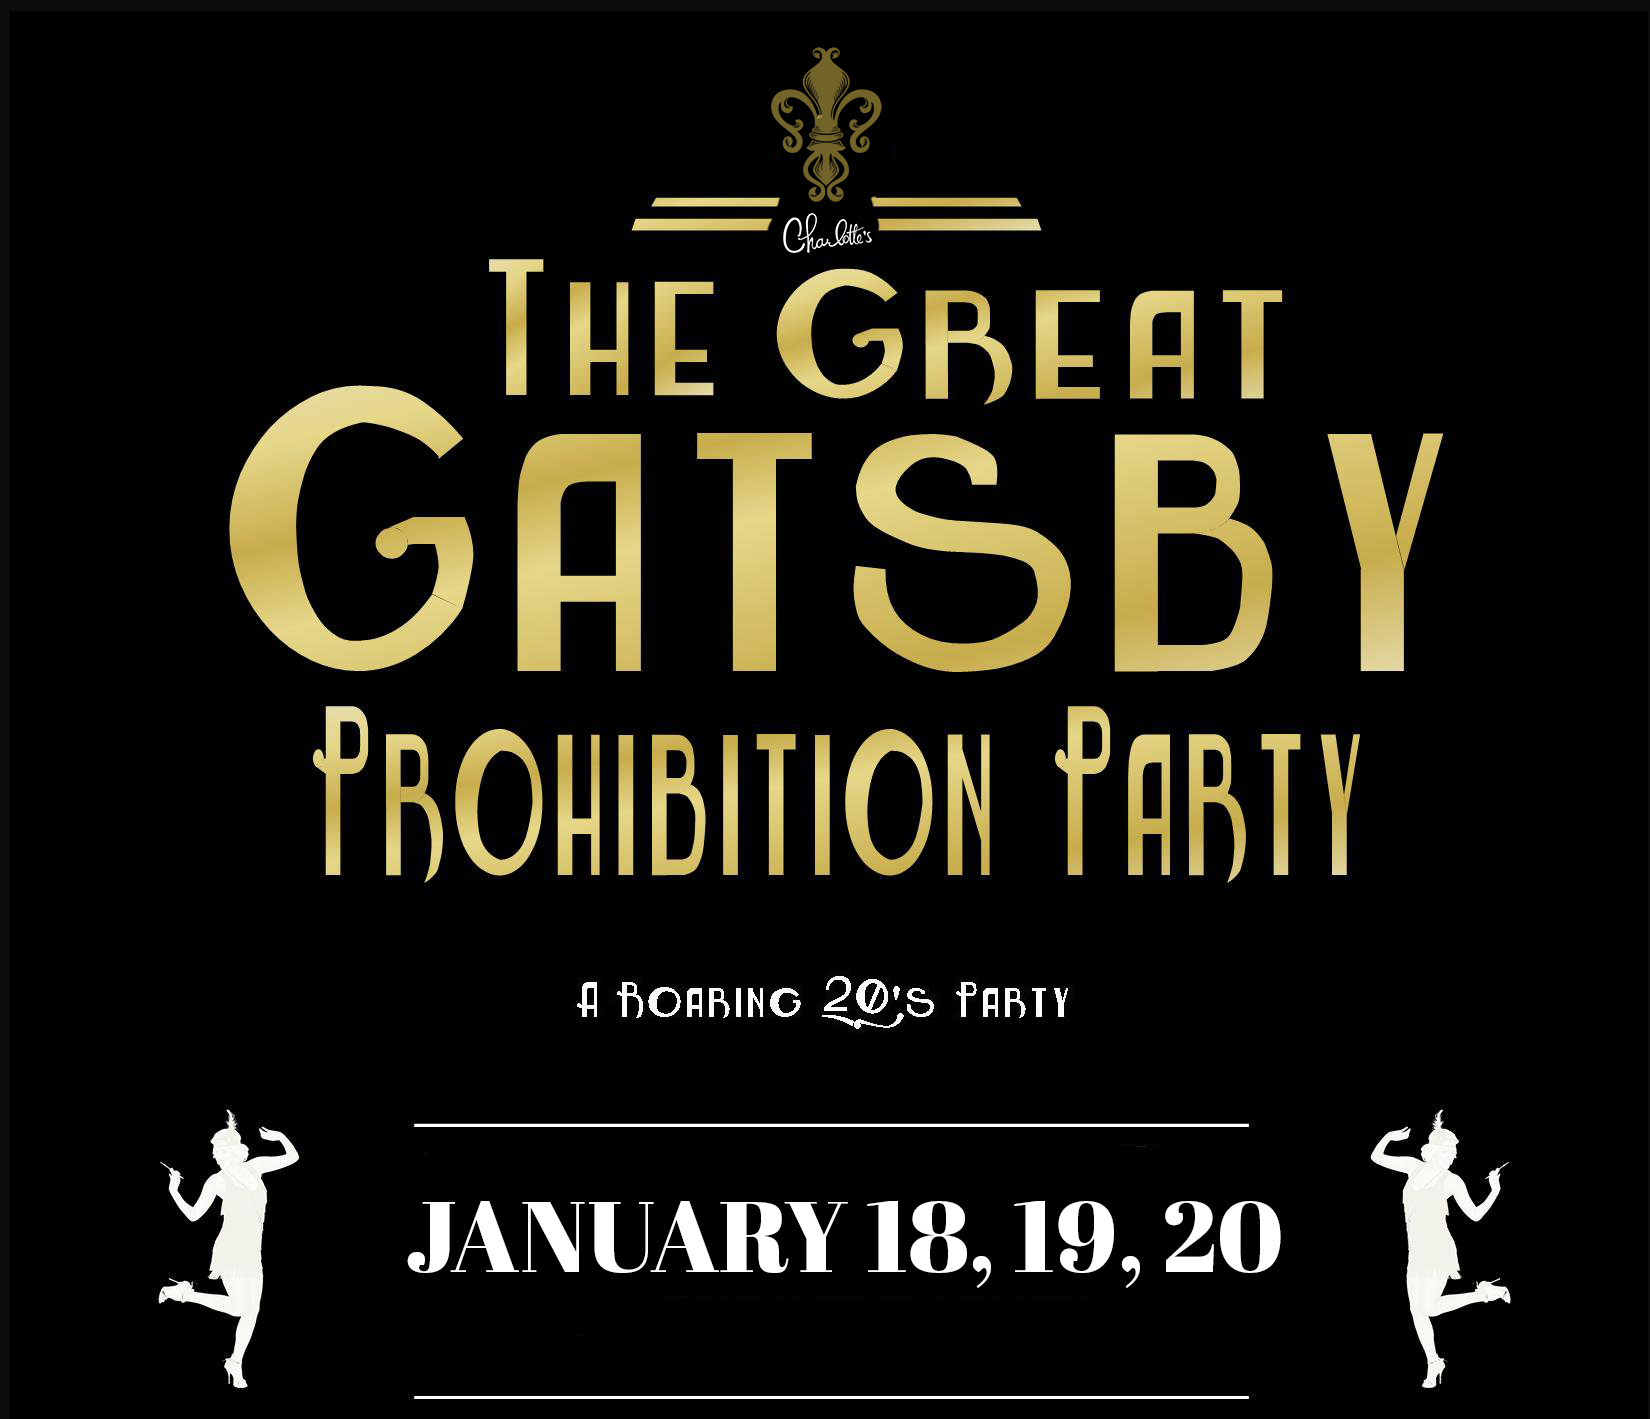 The Great Gatsby Prohibition Party